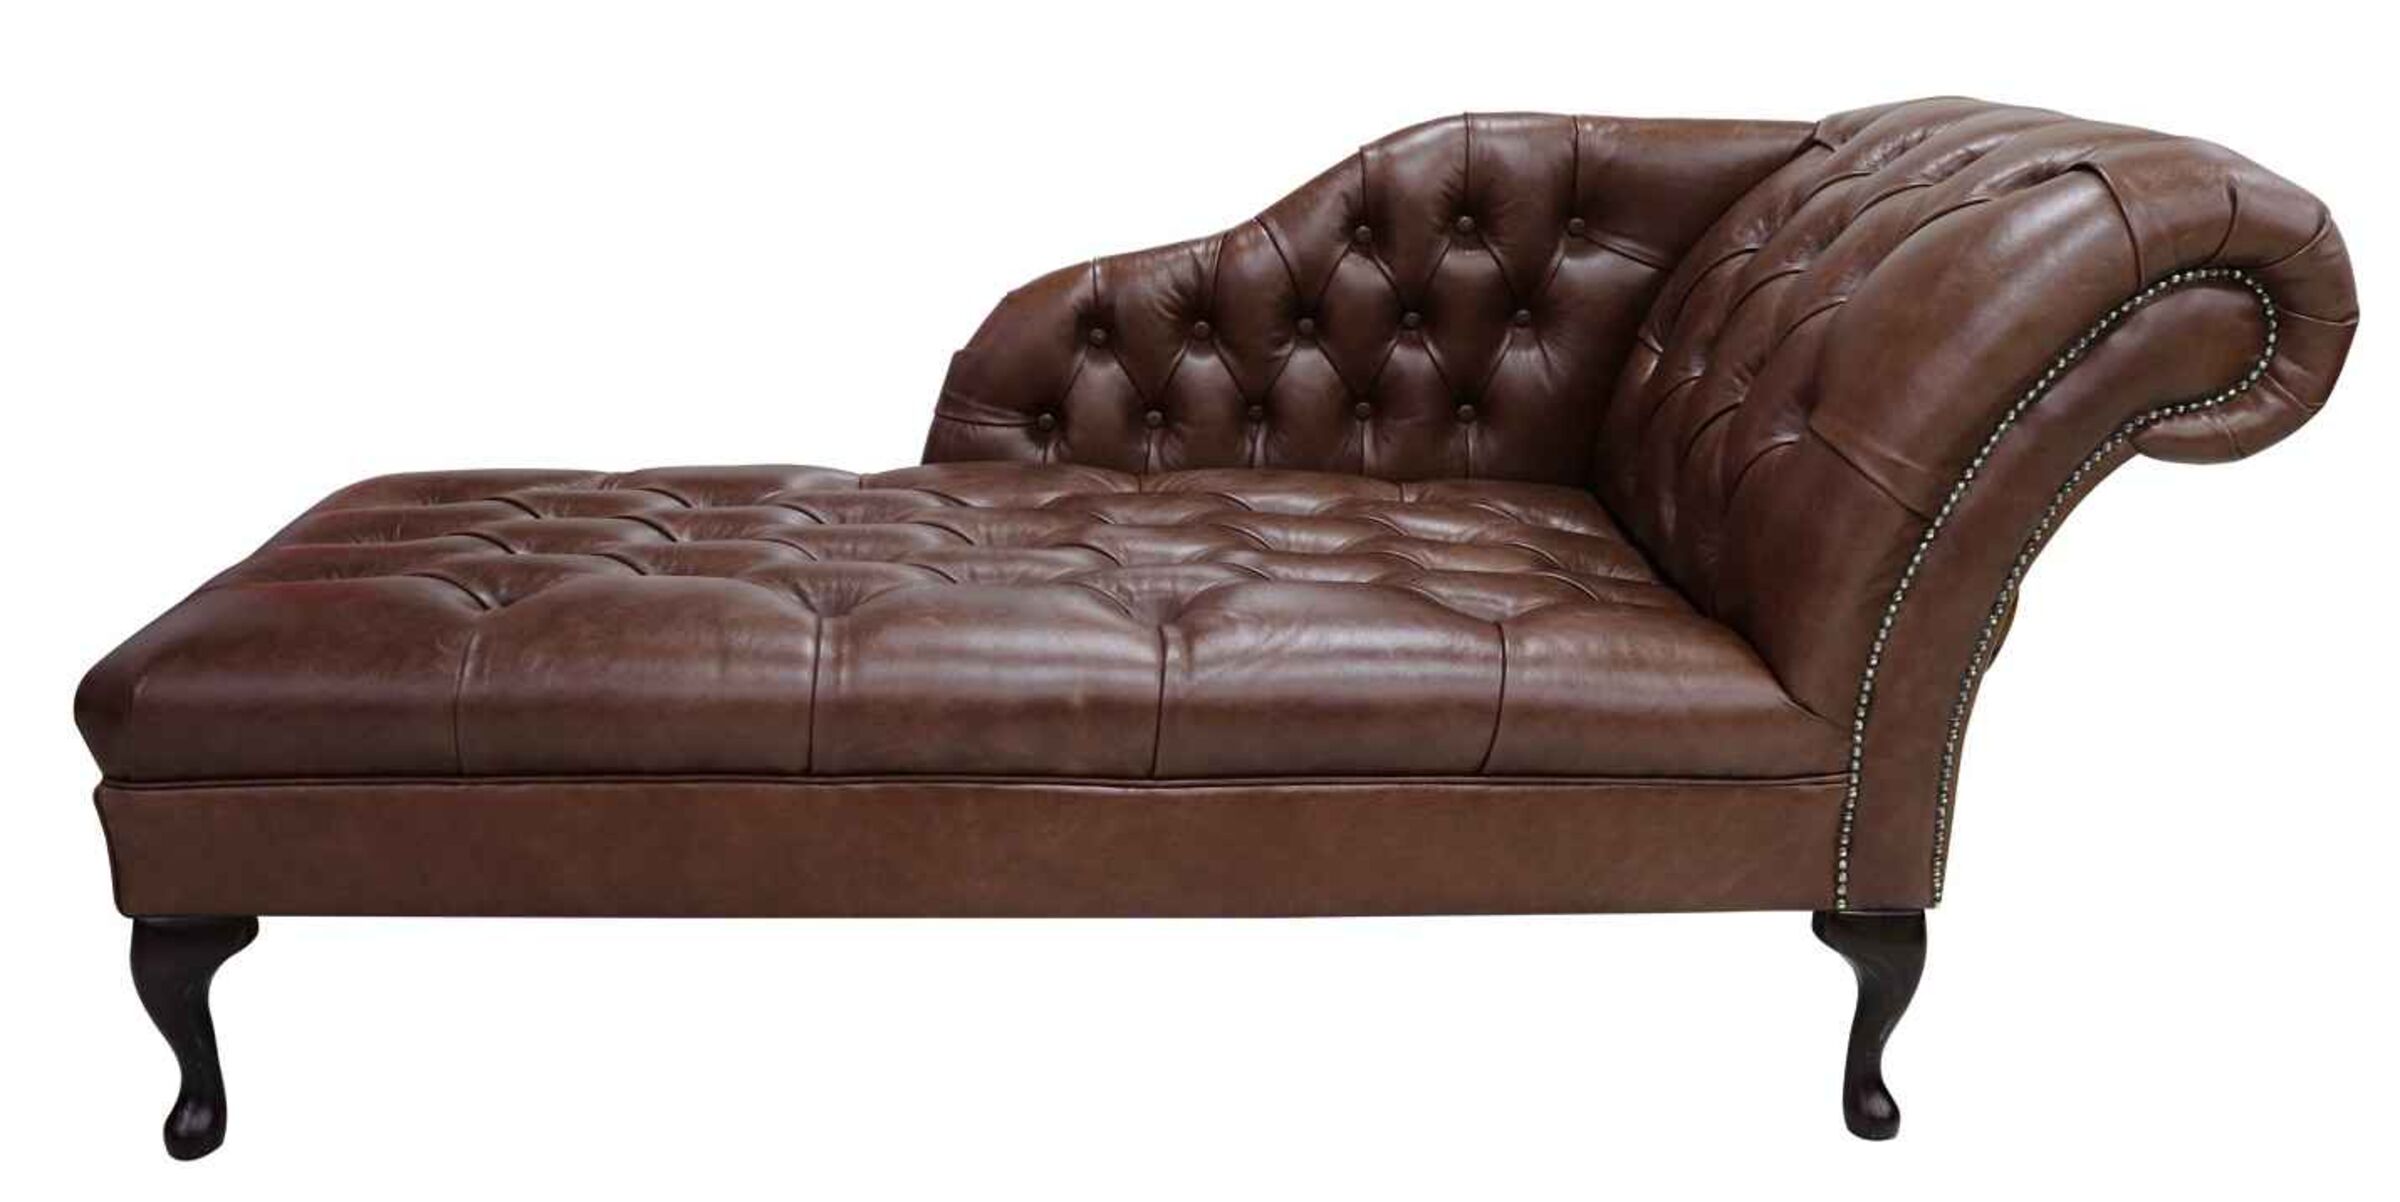 Chesterfield Leather Chaise Lounge Day Bed| Buttoned Seat DesignerSofas4U